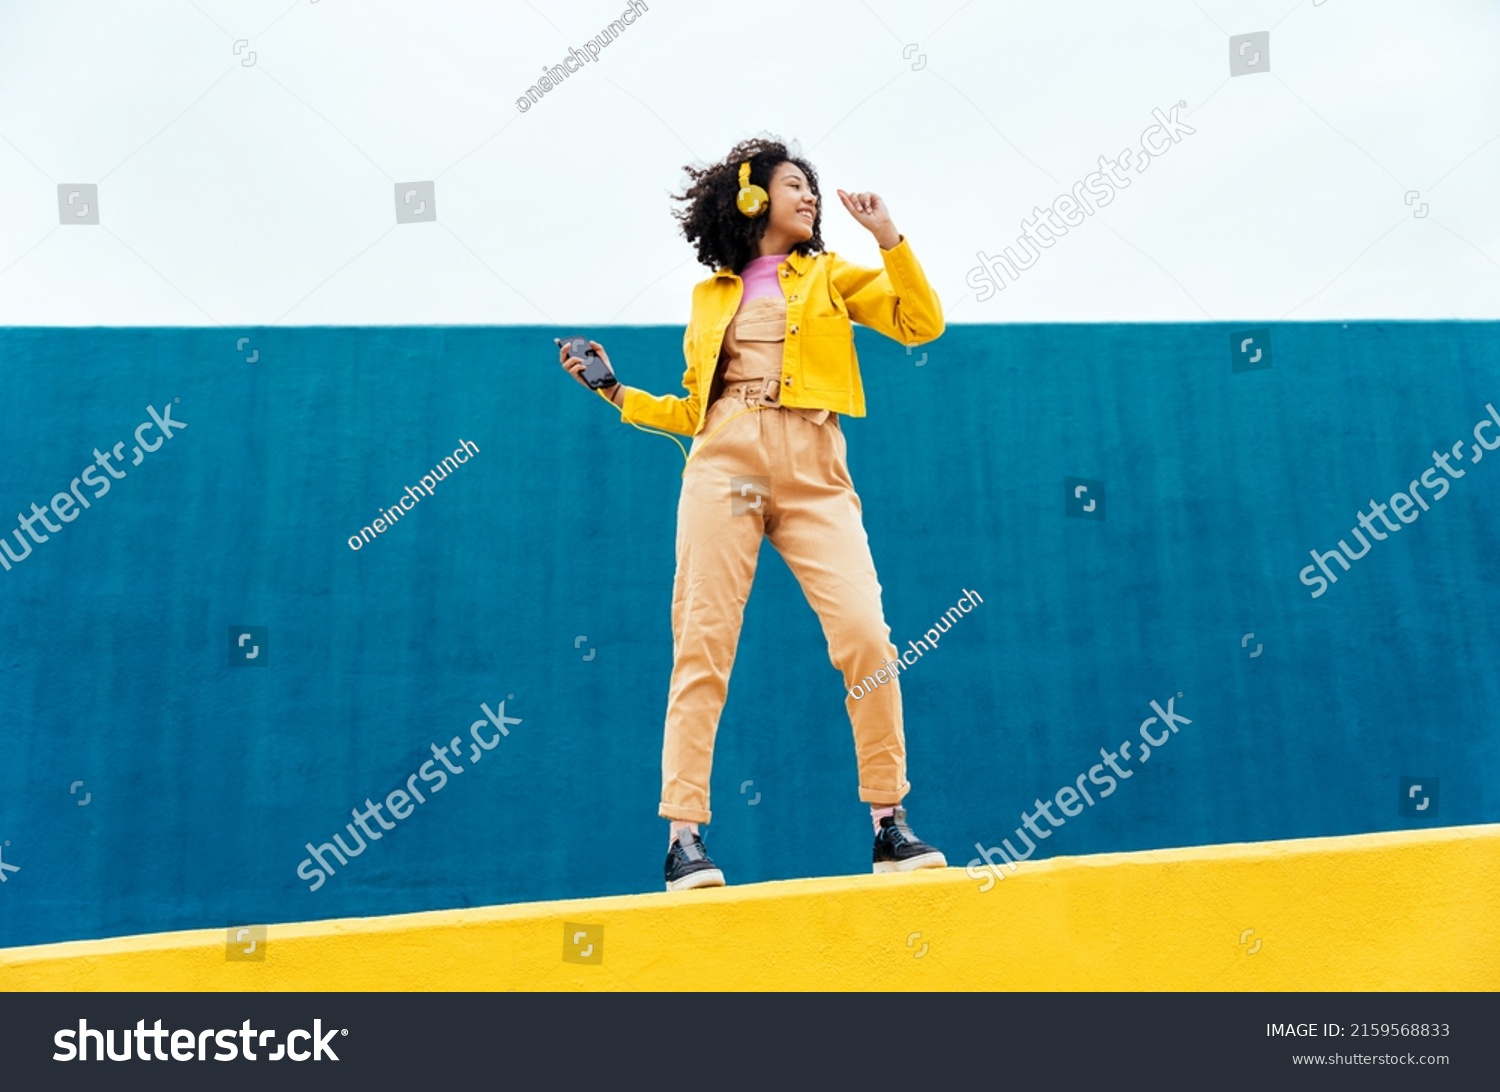 Young happy woman dancing and having fun outdoor. Teenager listening to music with smartphone and headphones in a yellow and blue modern urban area #2159568833